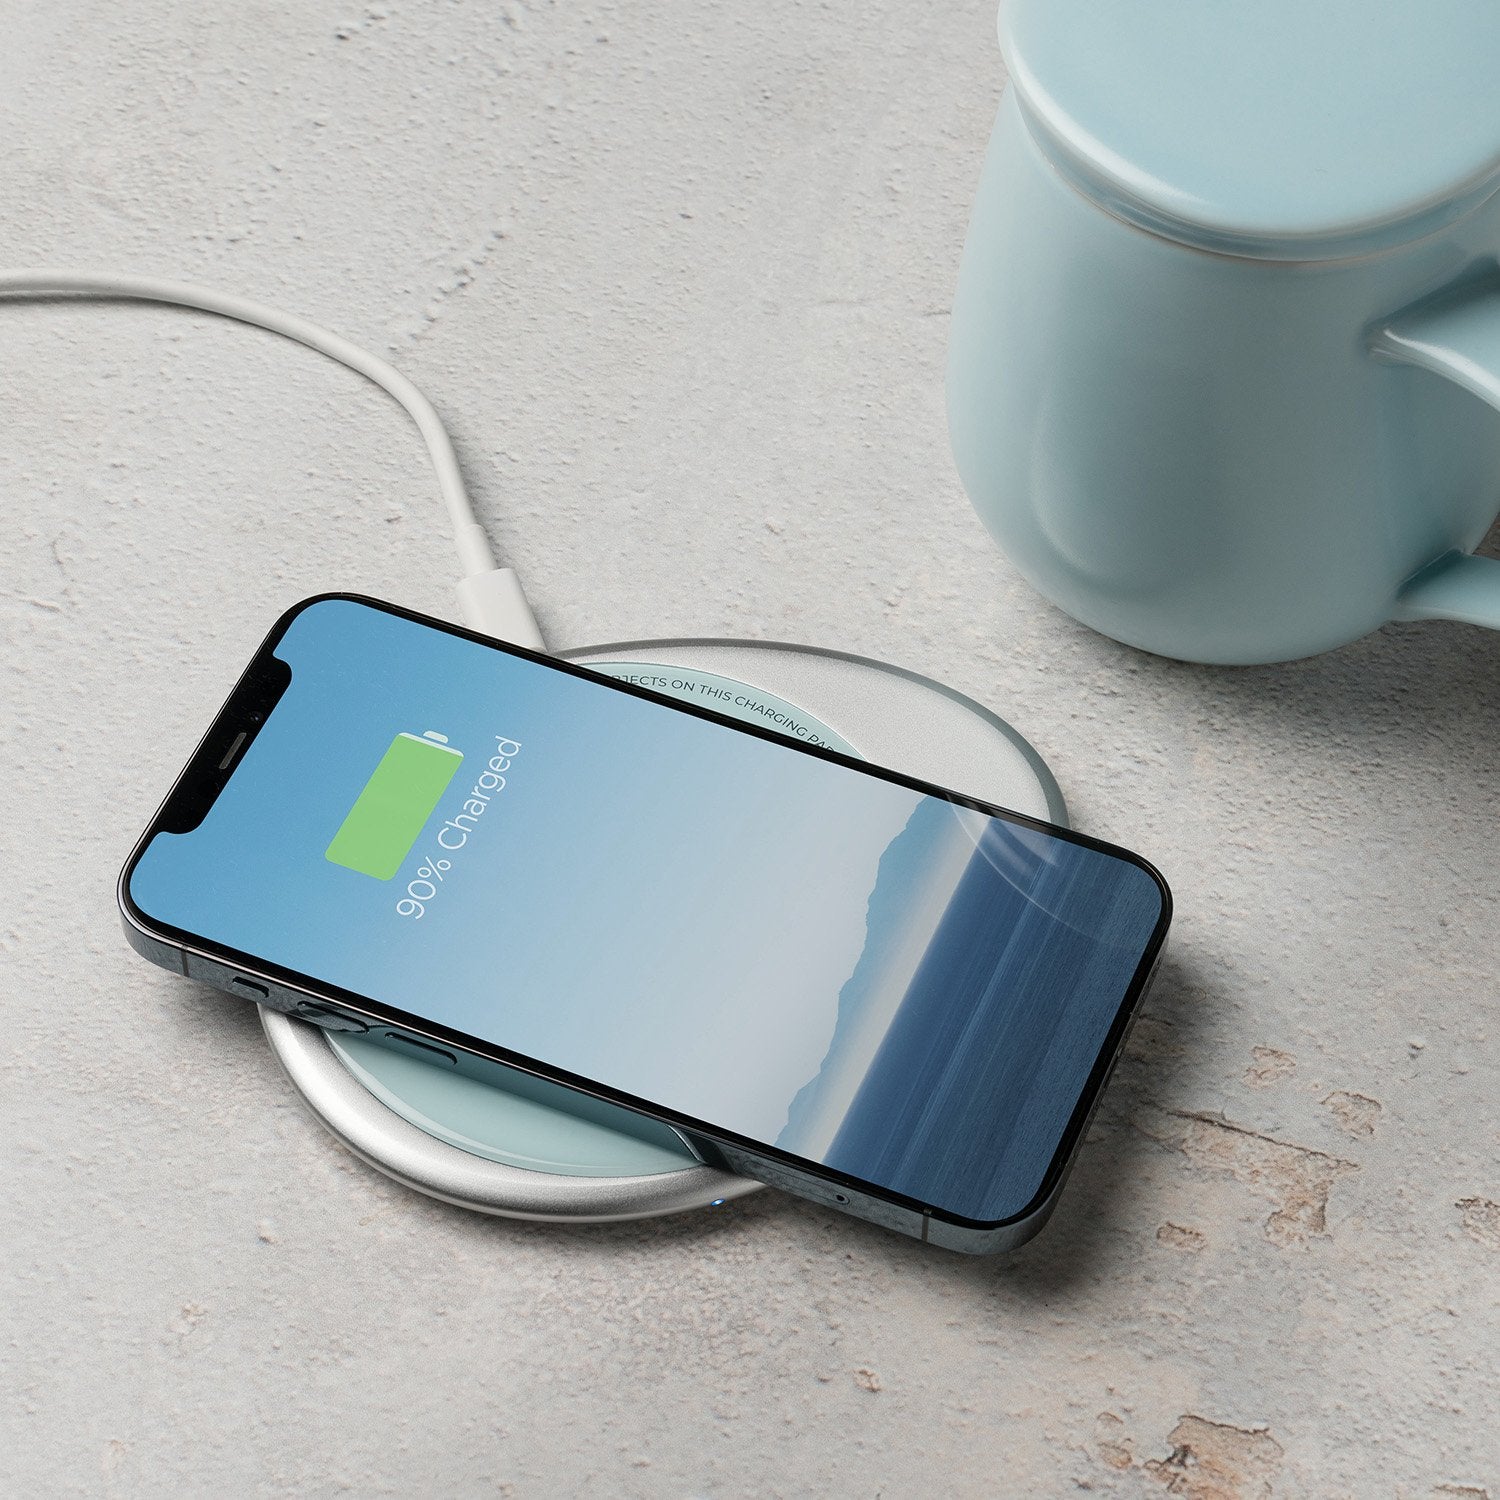 Light blue mug with lid next to phone on charging pad